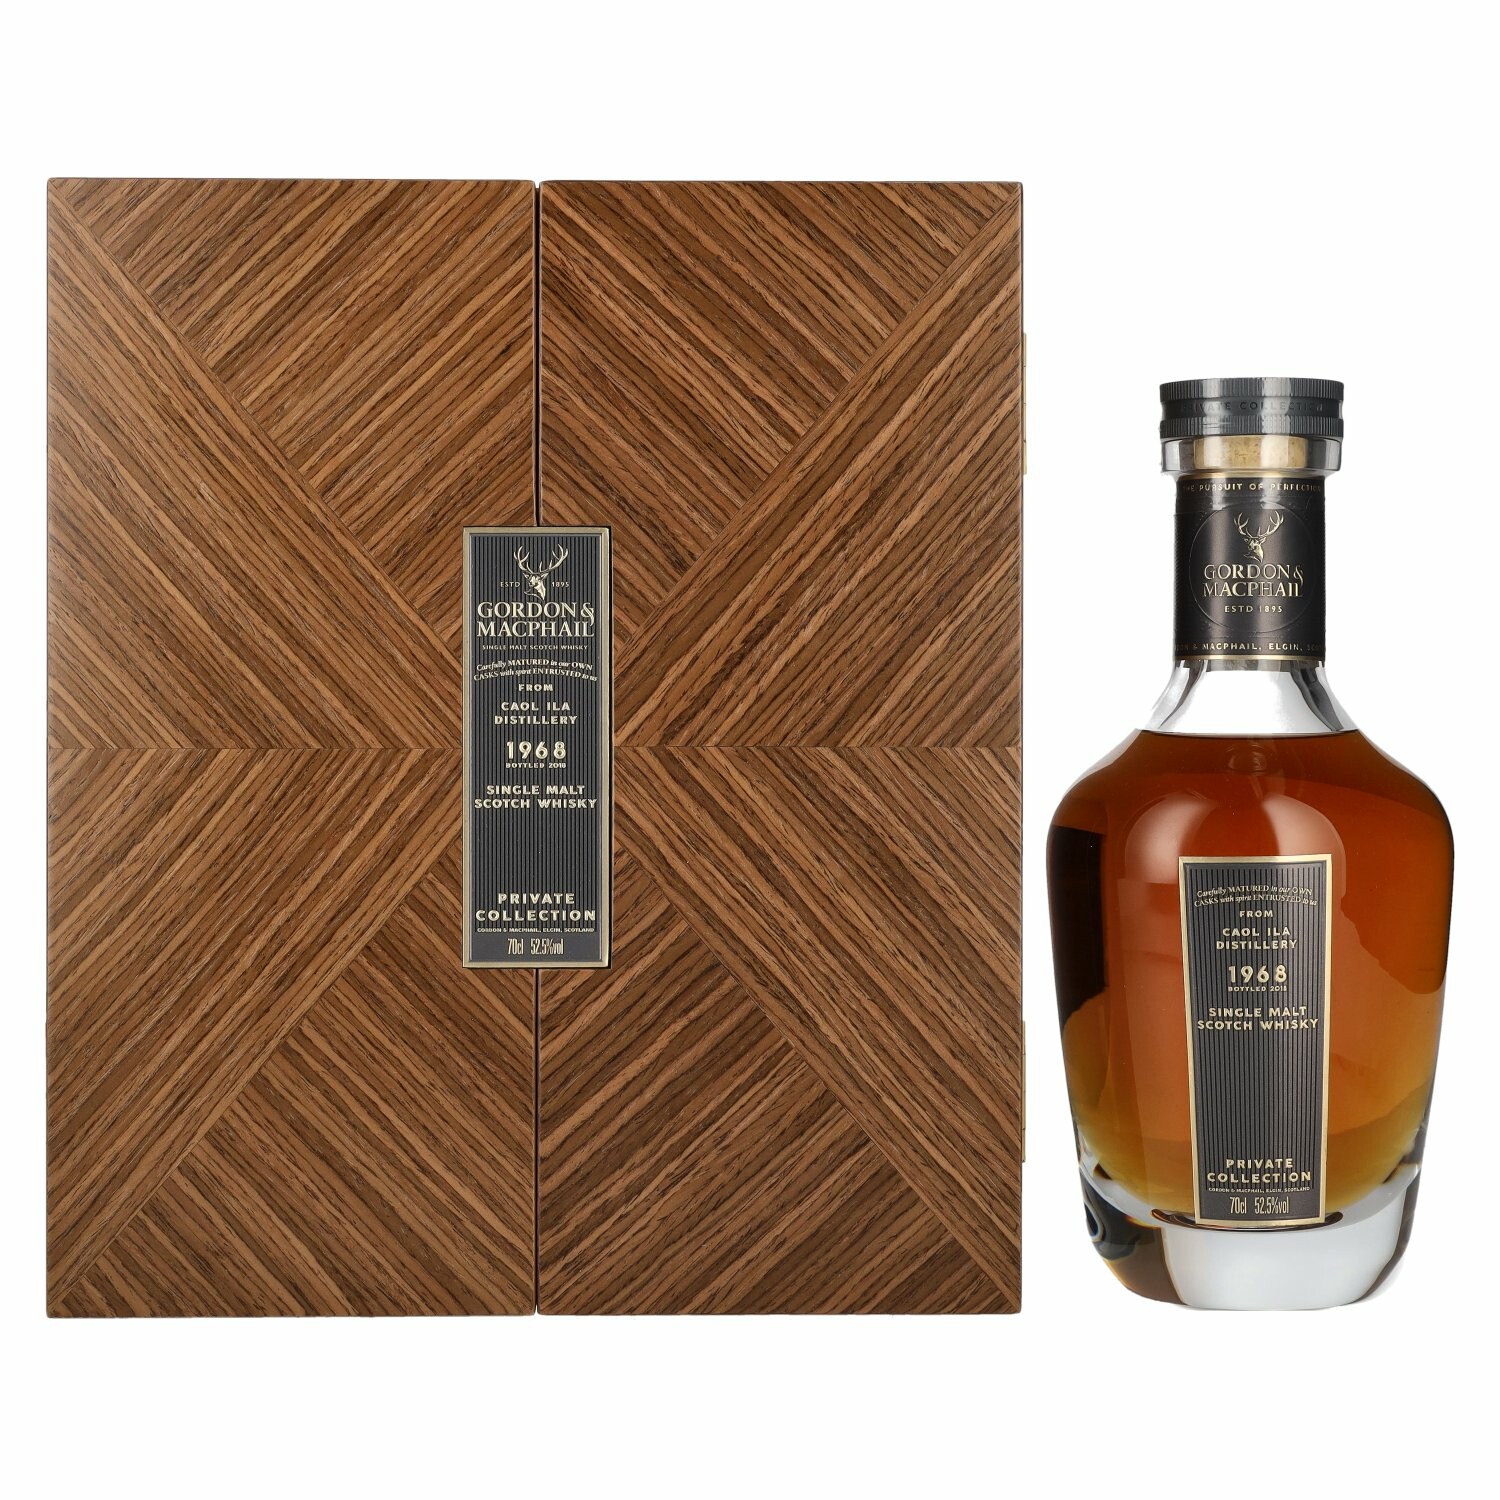 Gordon & MacPhail CAOL ILA Private Collection 1968 52,5% Vol. 0,7l in Holzkiste